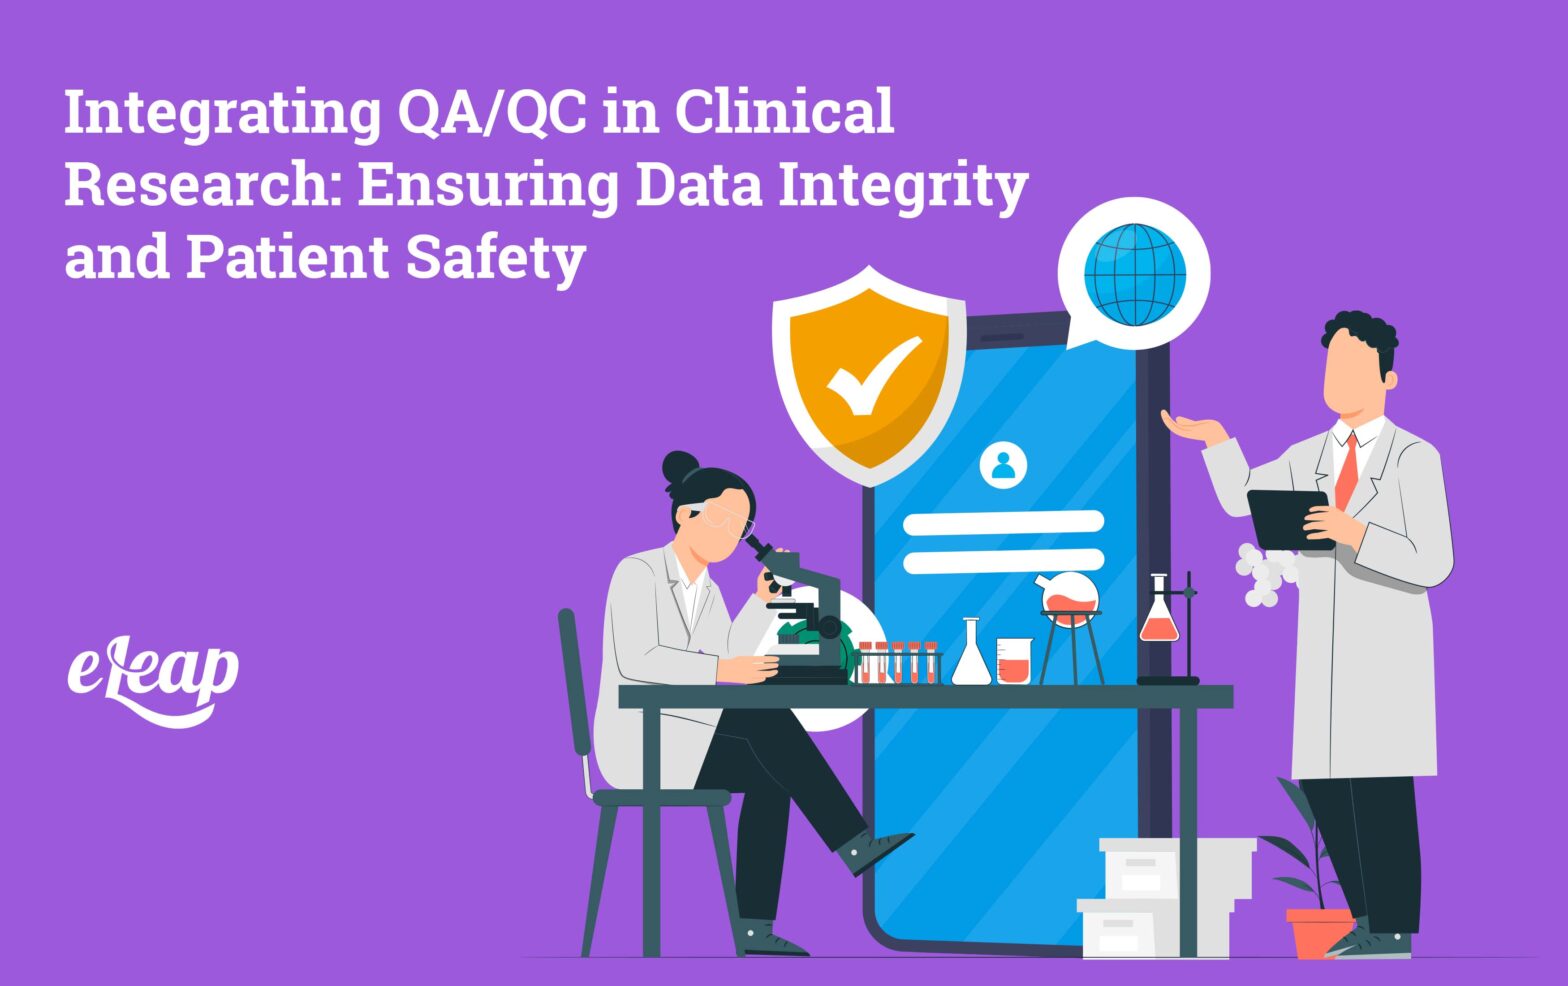 Integrating QA/QC in Clinical Research: Ensuring Data Integrity and Patient Safety